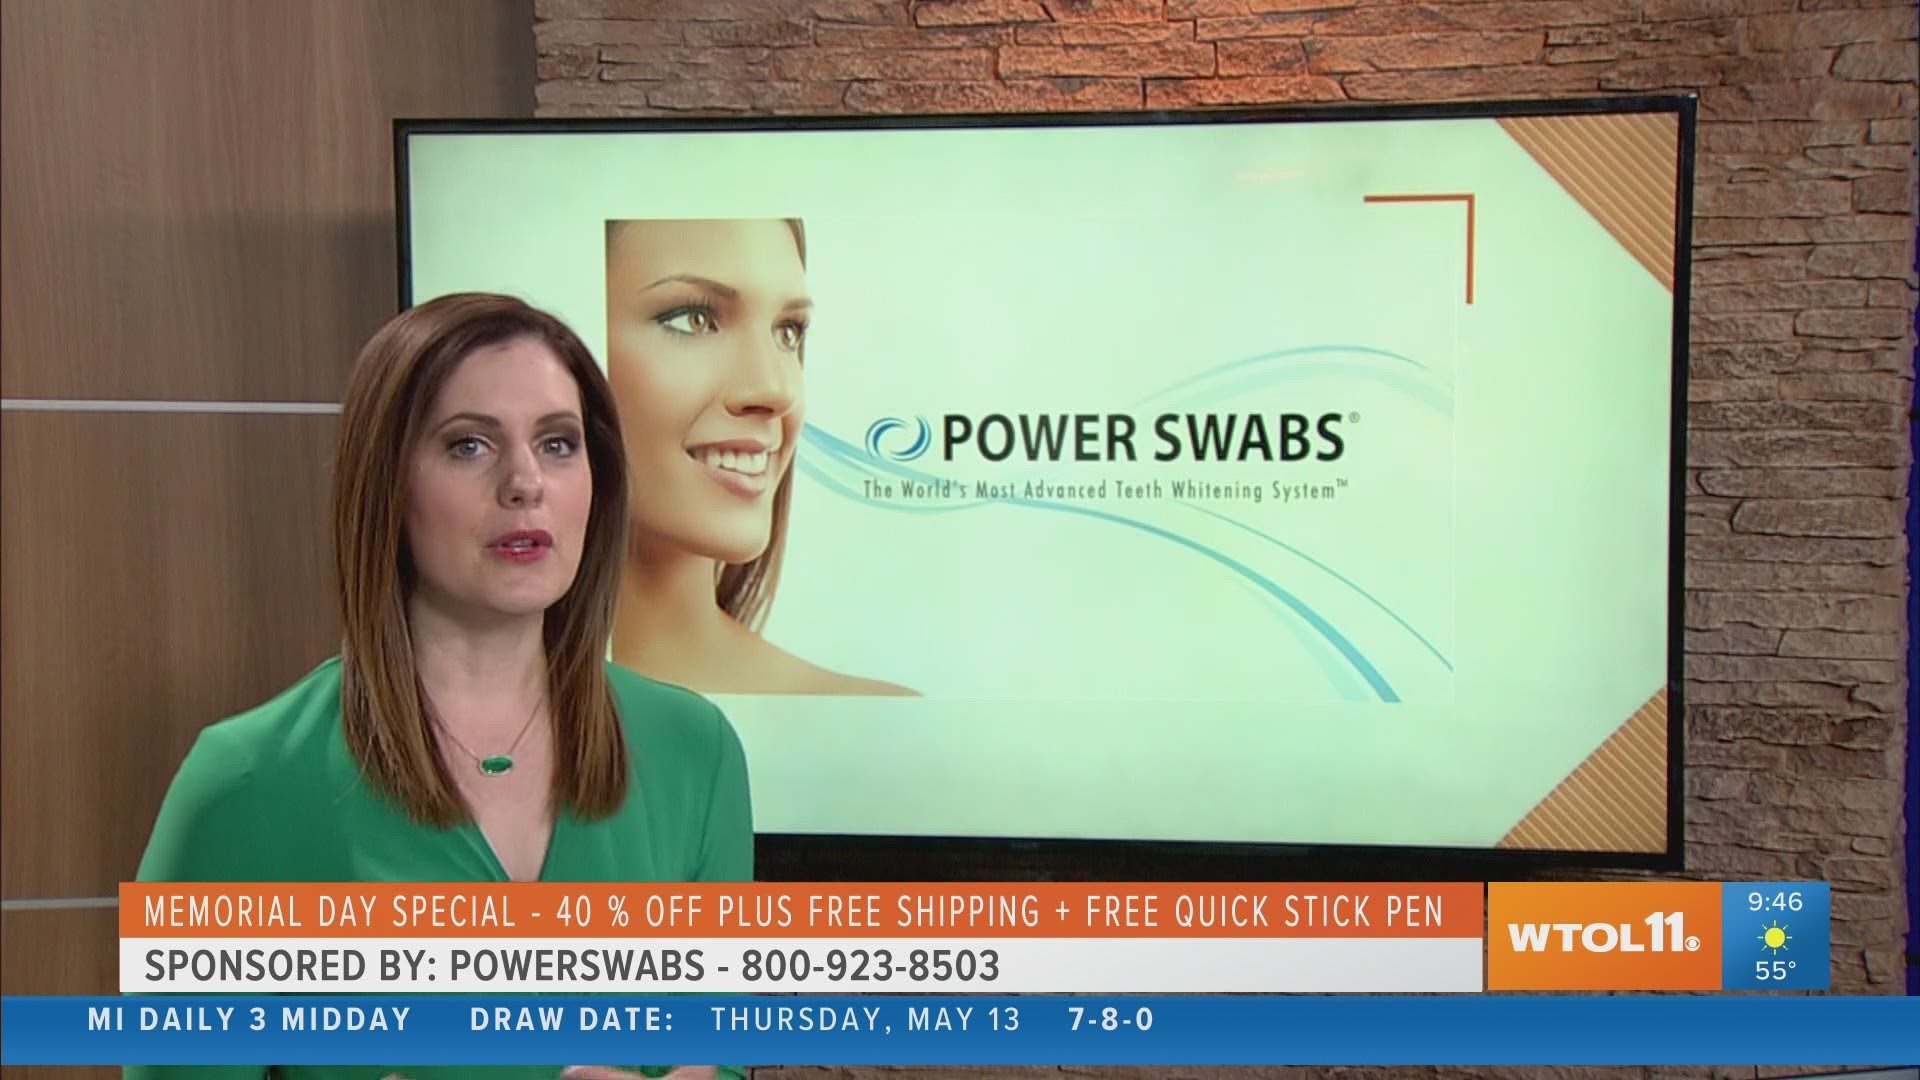 Get back into your normal routine with an amazing smile with help from Powerswabs!